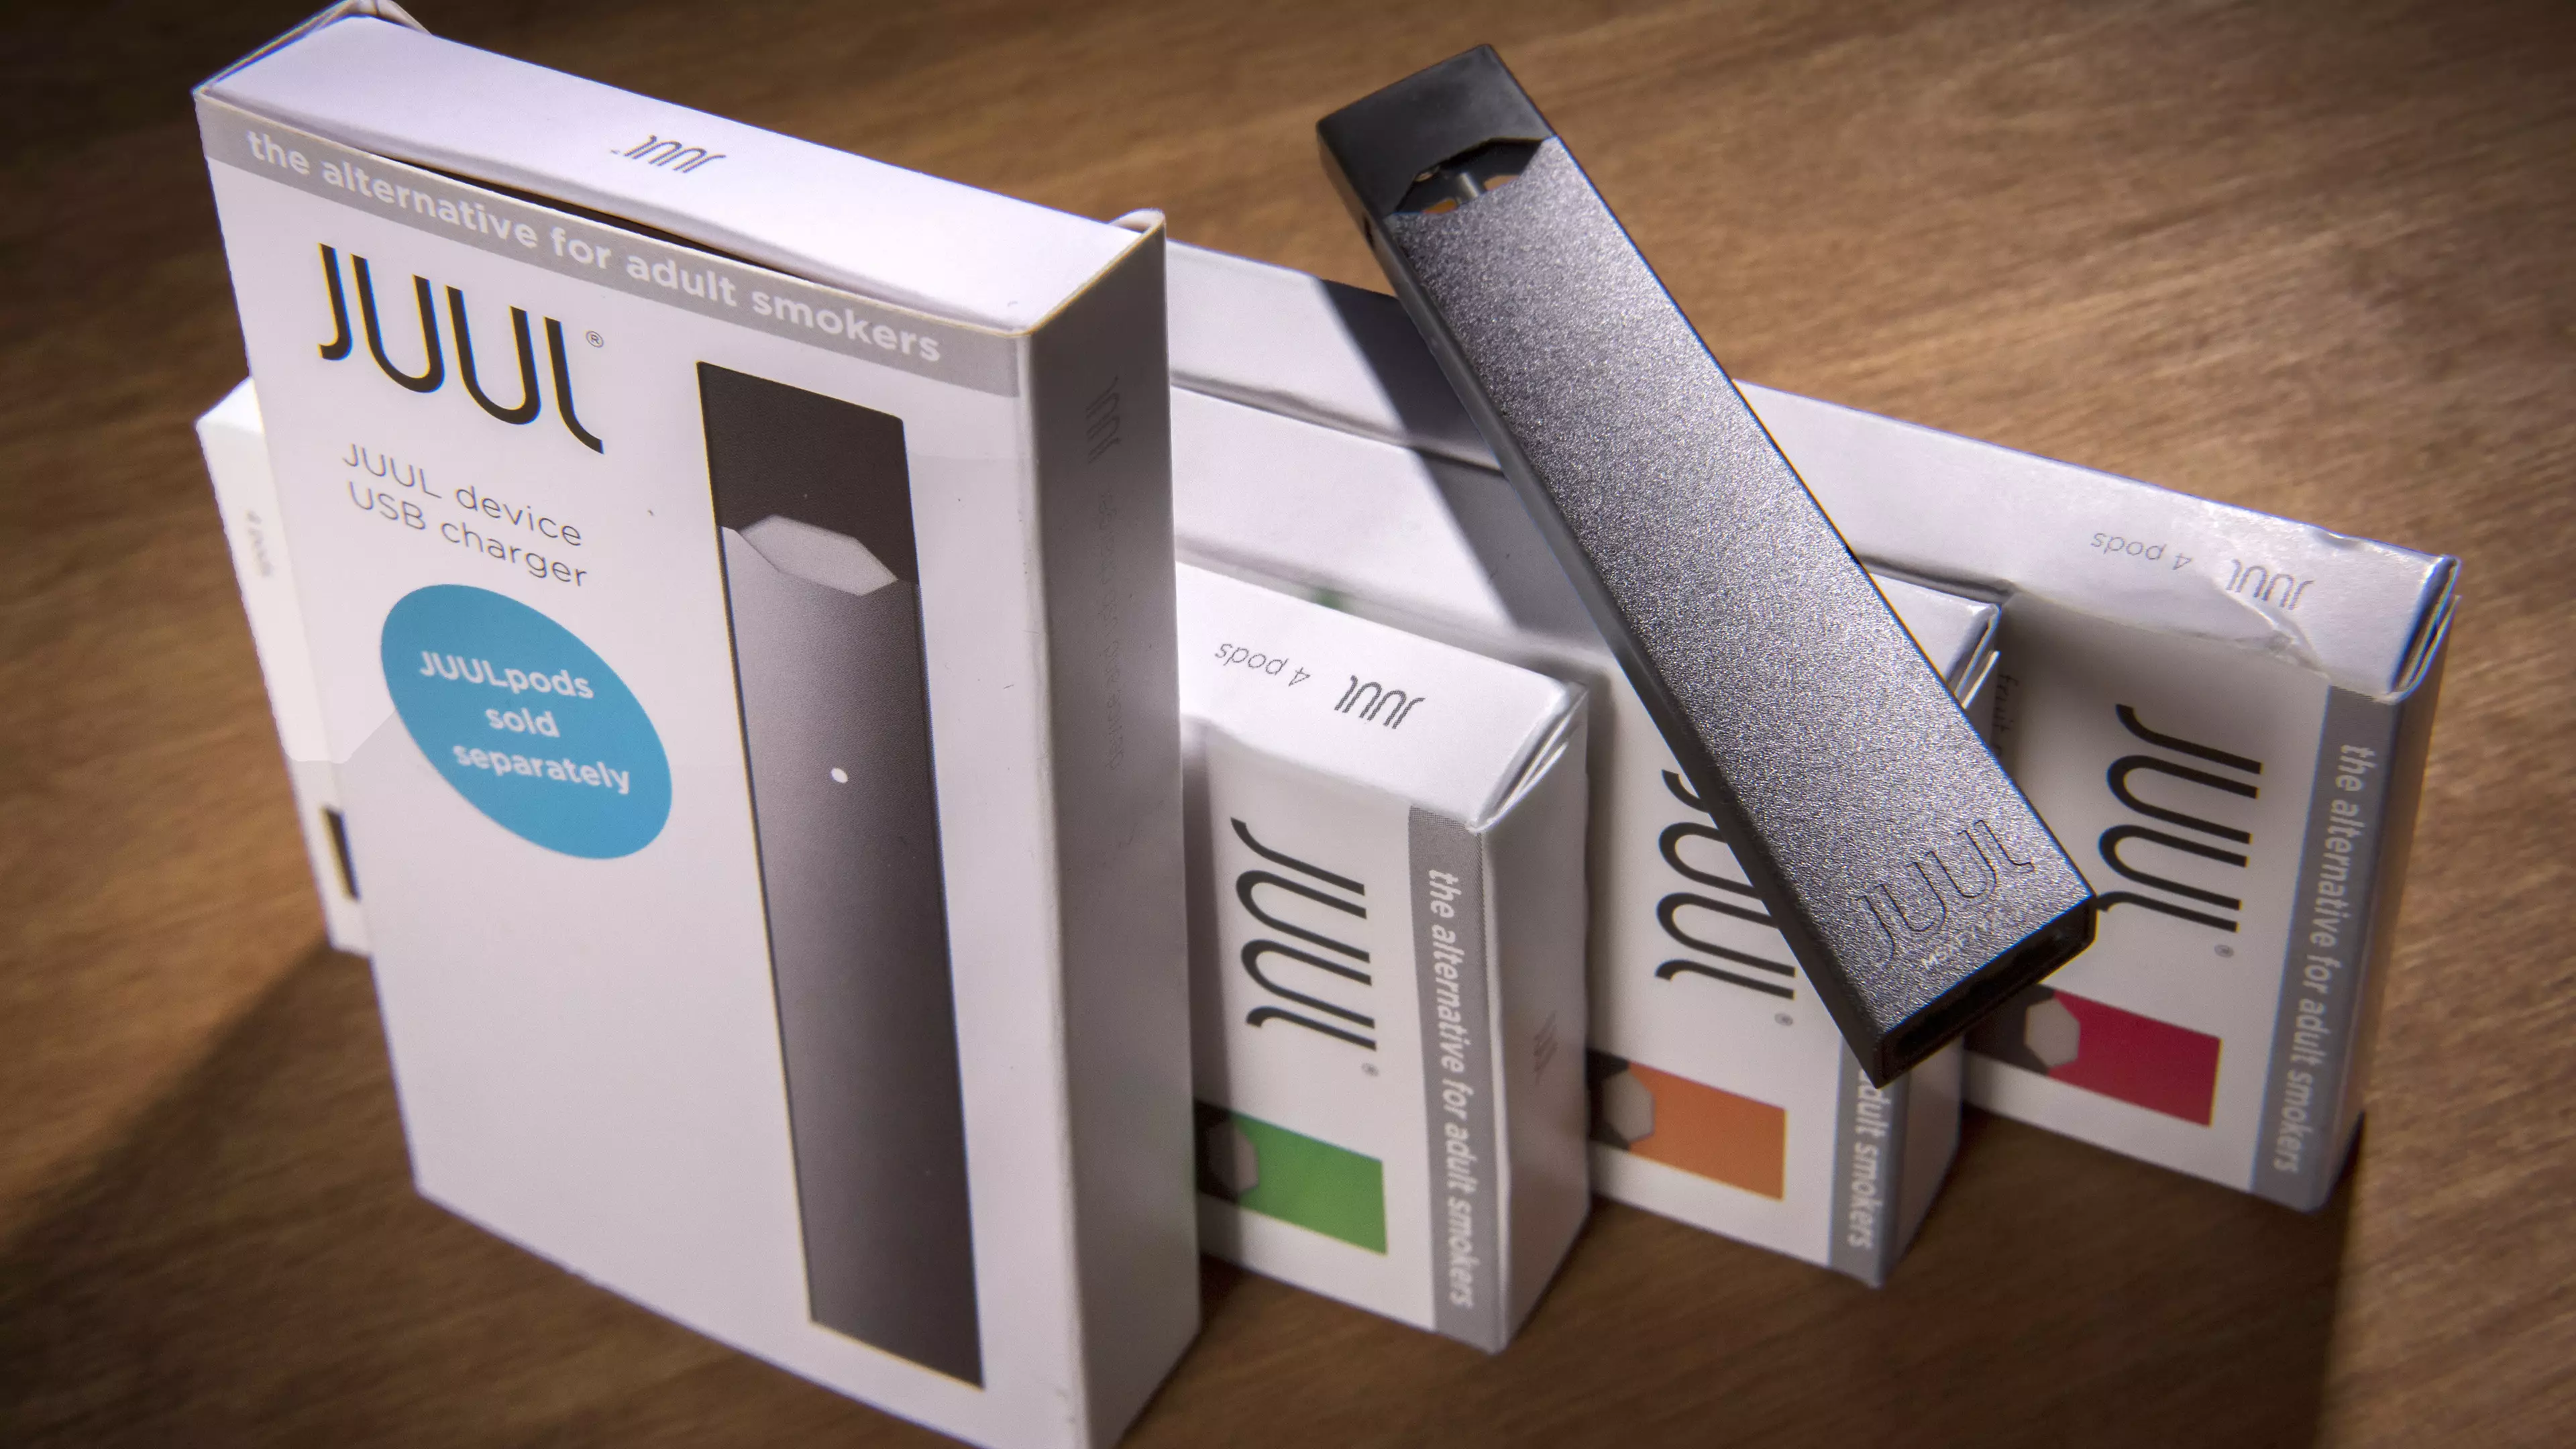 CEO Of Juul Tells People Not To Use Juul Vaping Products